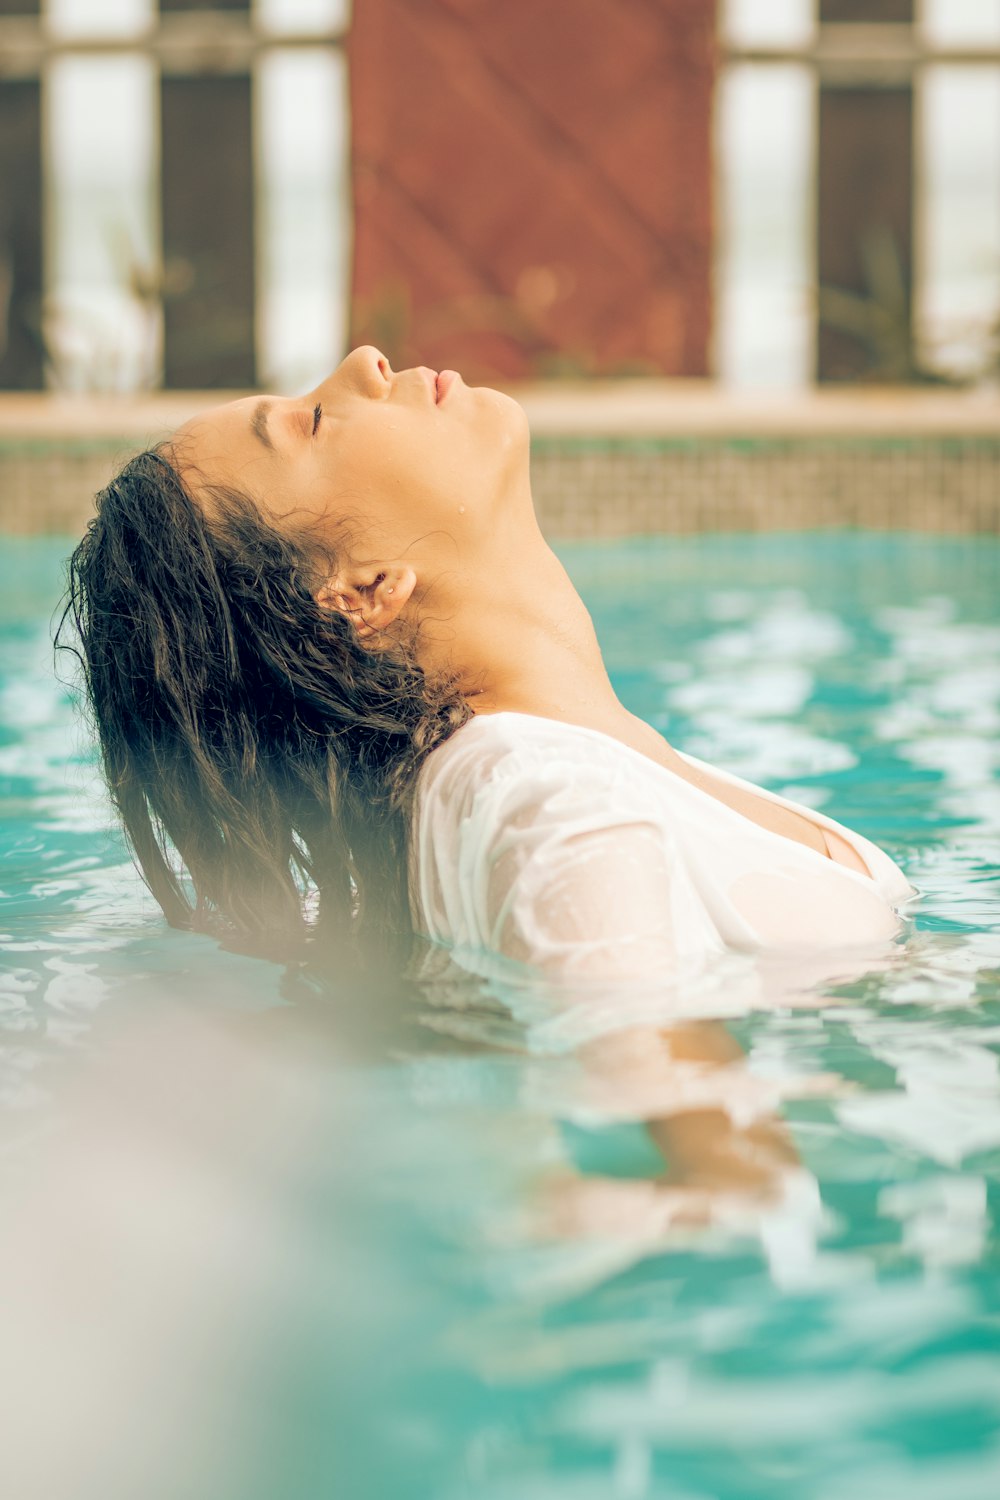 woman in white shirt in swimming pool during daytime